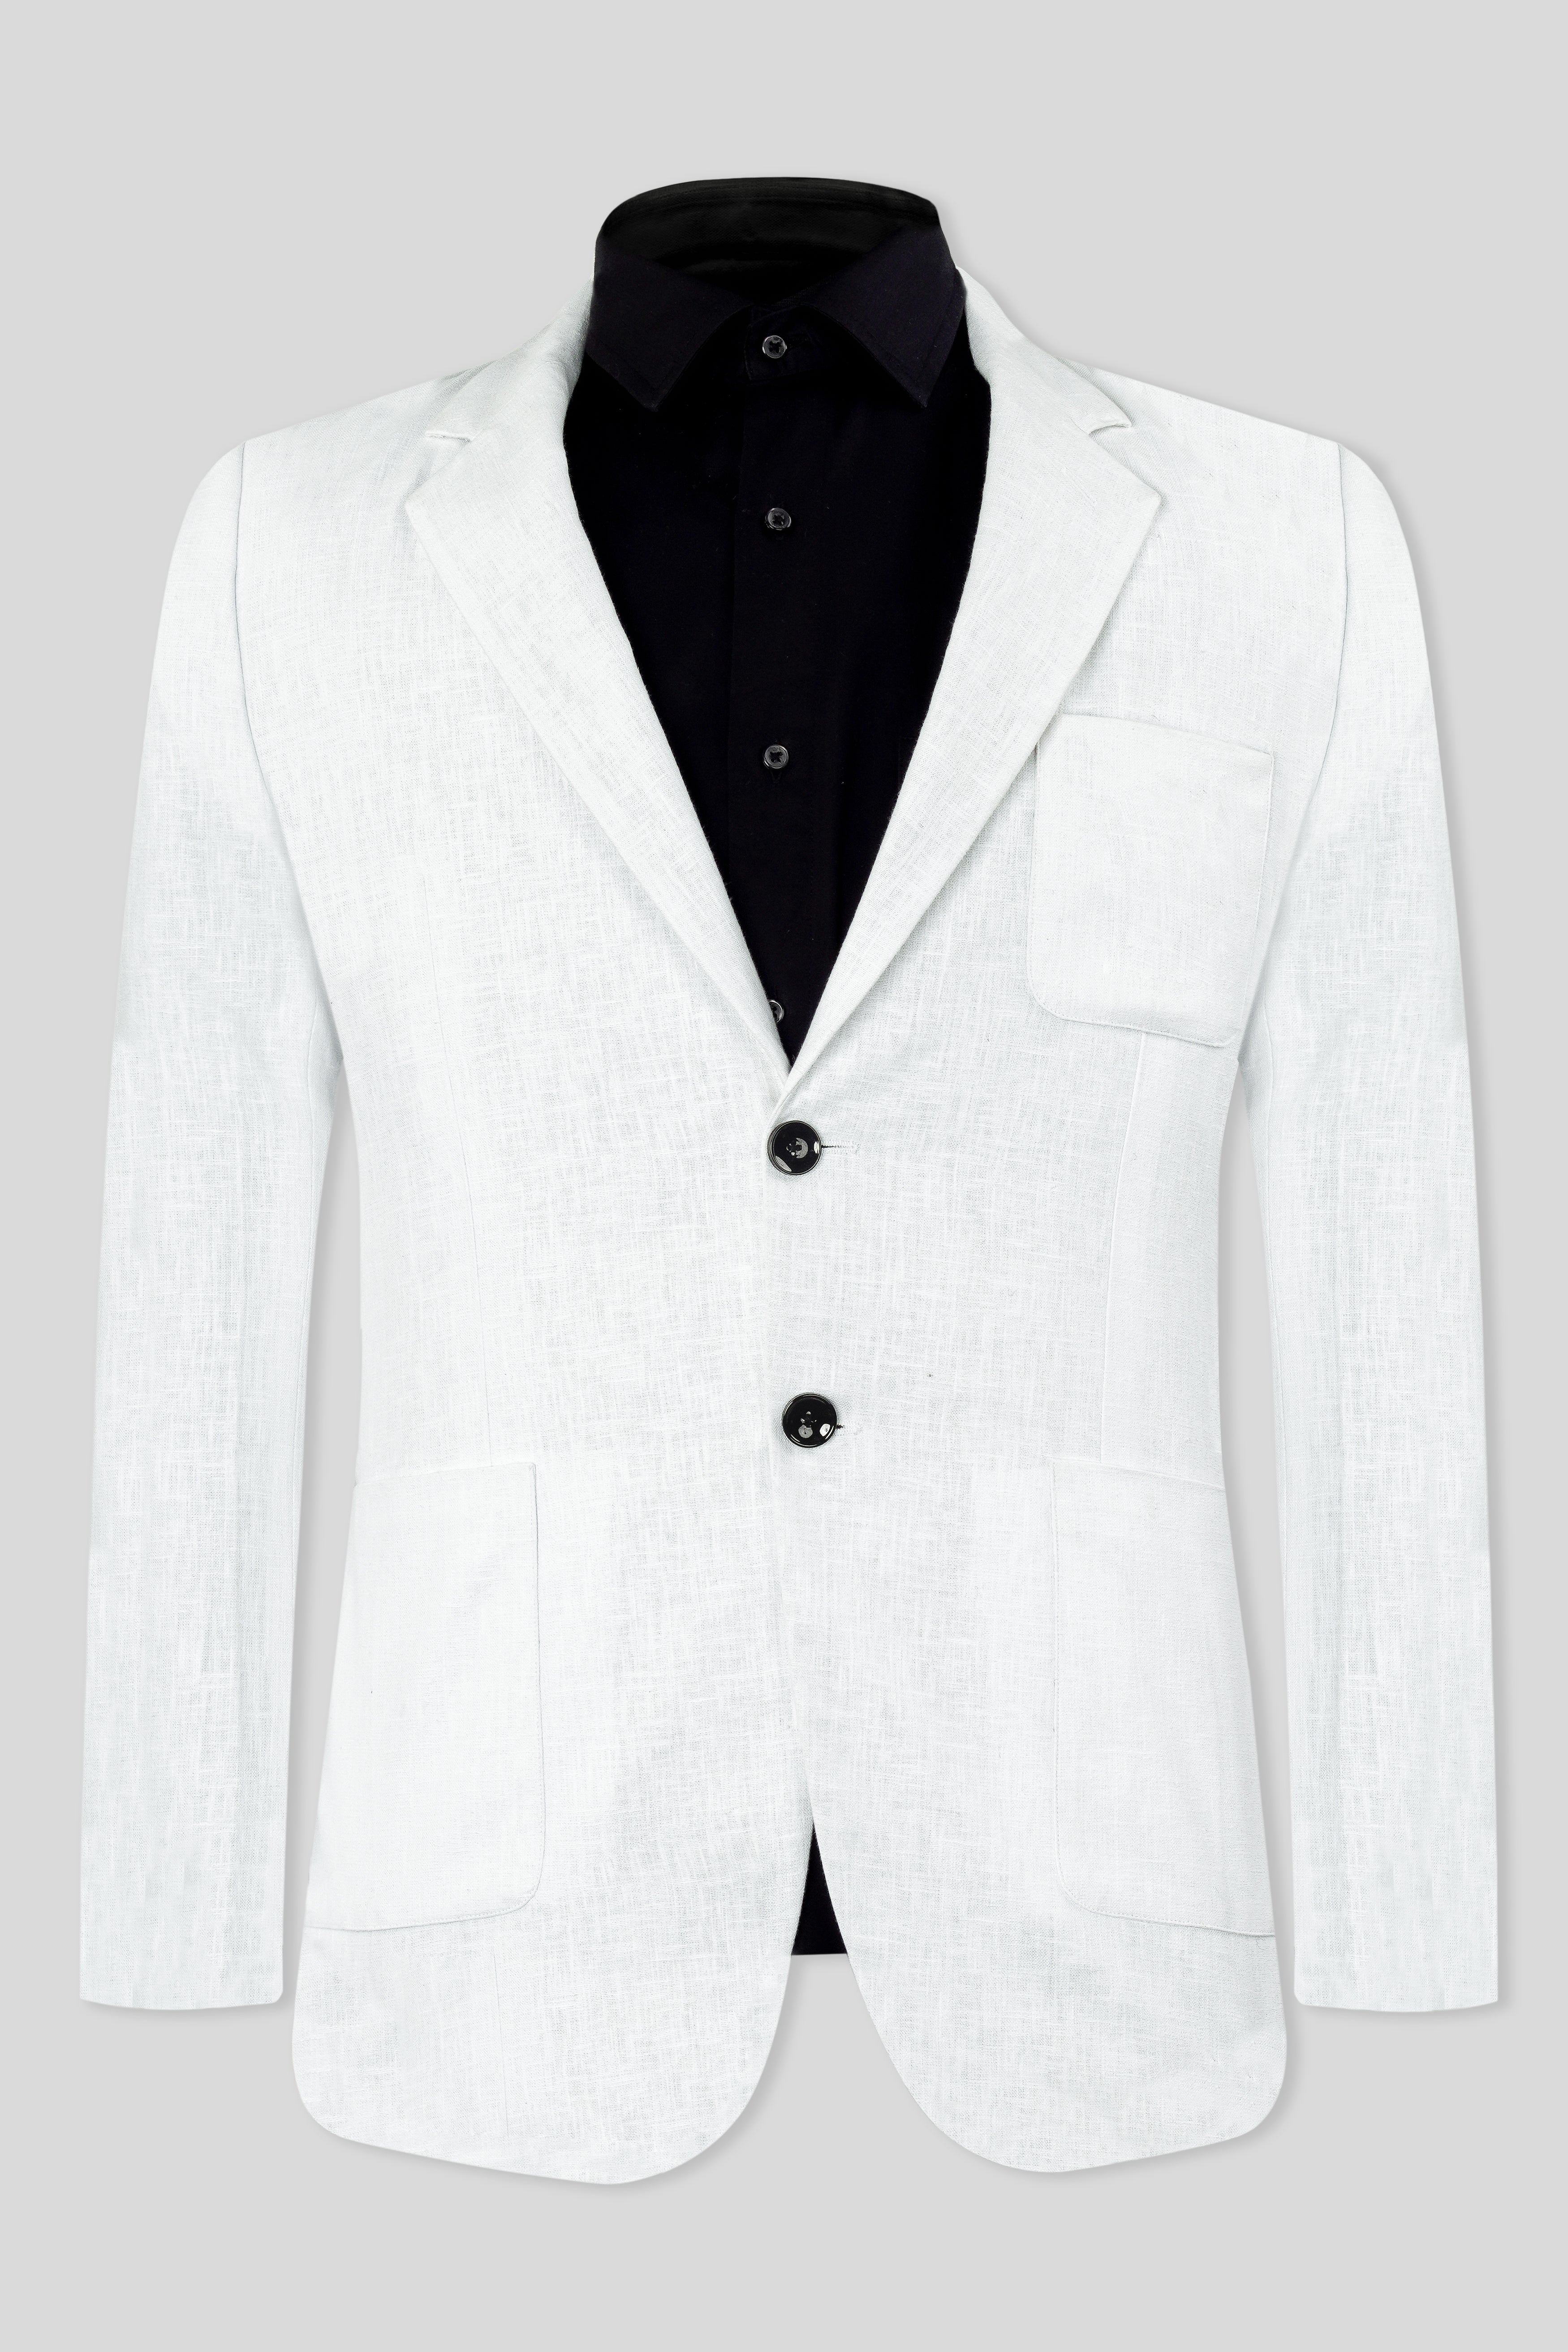 Bright White Luxurious Linen Single Breasted Blazer  ,BL3042-SB-PP-36, BL3042-SB-PP-38, BL3042-SB-PP-40, BL3042-SB-PP-42, BL3042-SB-PP-44, BL3042-SB-PP-46, BL3042-SB-PP-48, BL3042-SB-PP-50, BL3042-SB-PP-52, BL3042-SB-PP-54, BL3042-SB-PP-56, BL3042-SB-PP-58, BL3042-SB-PP-60